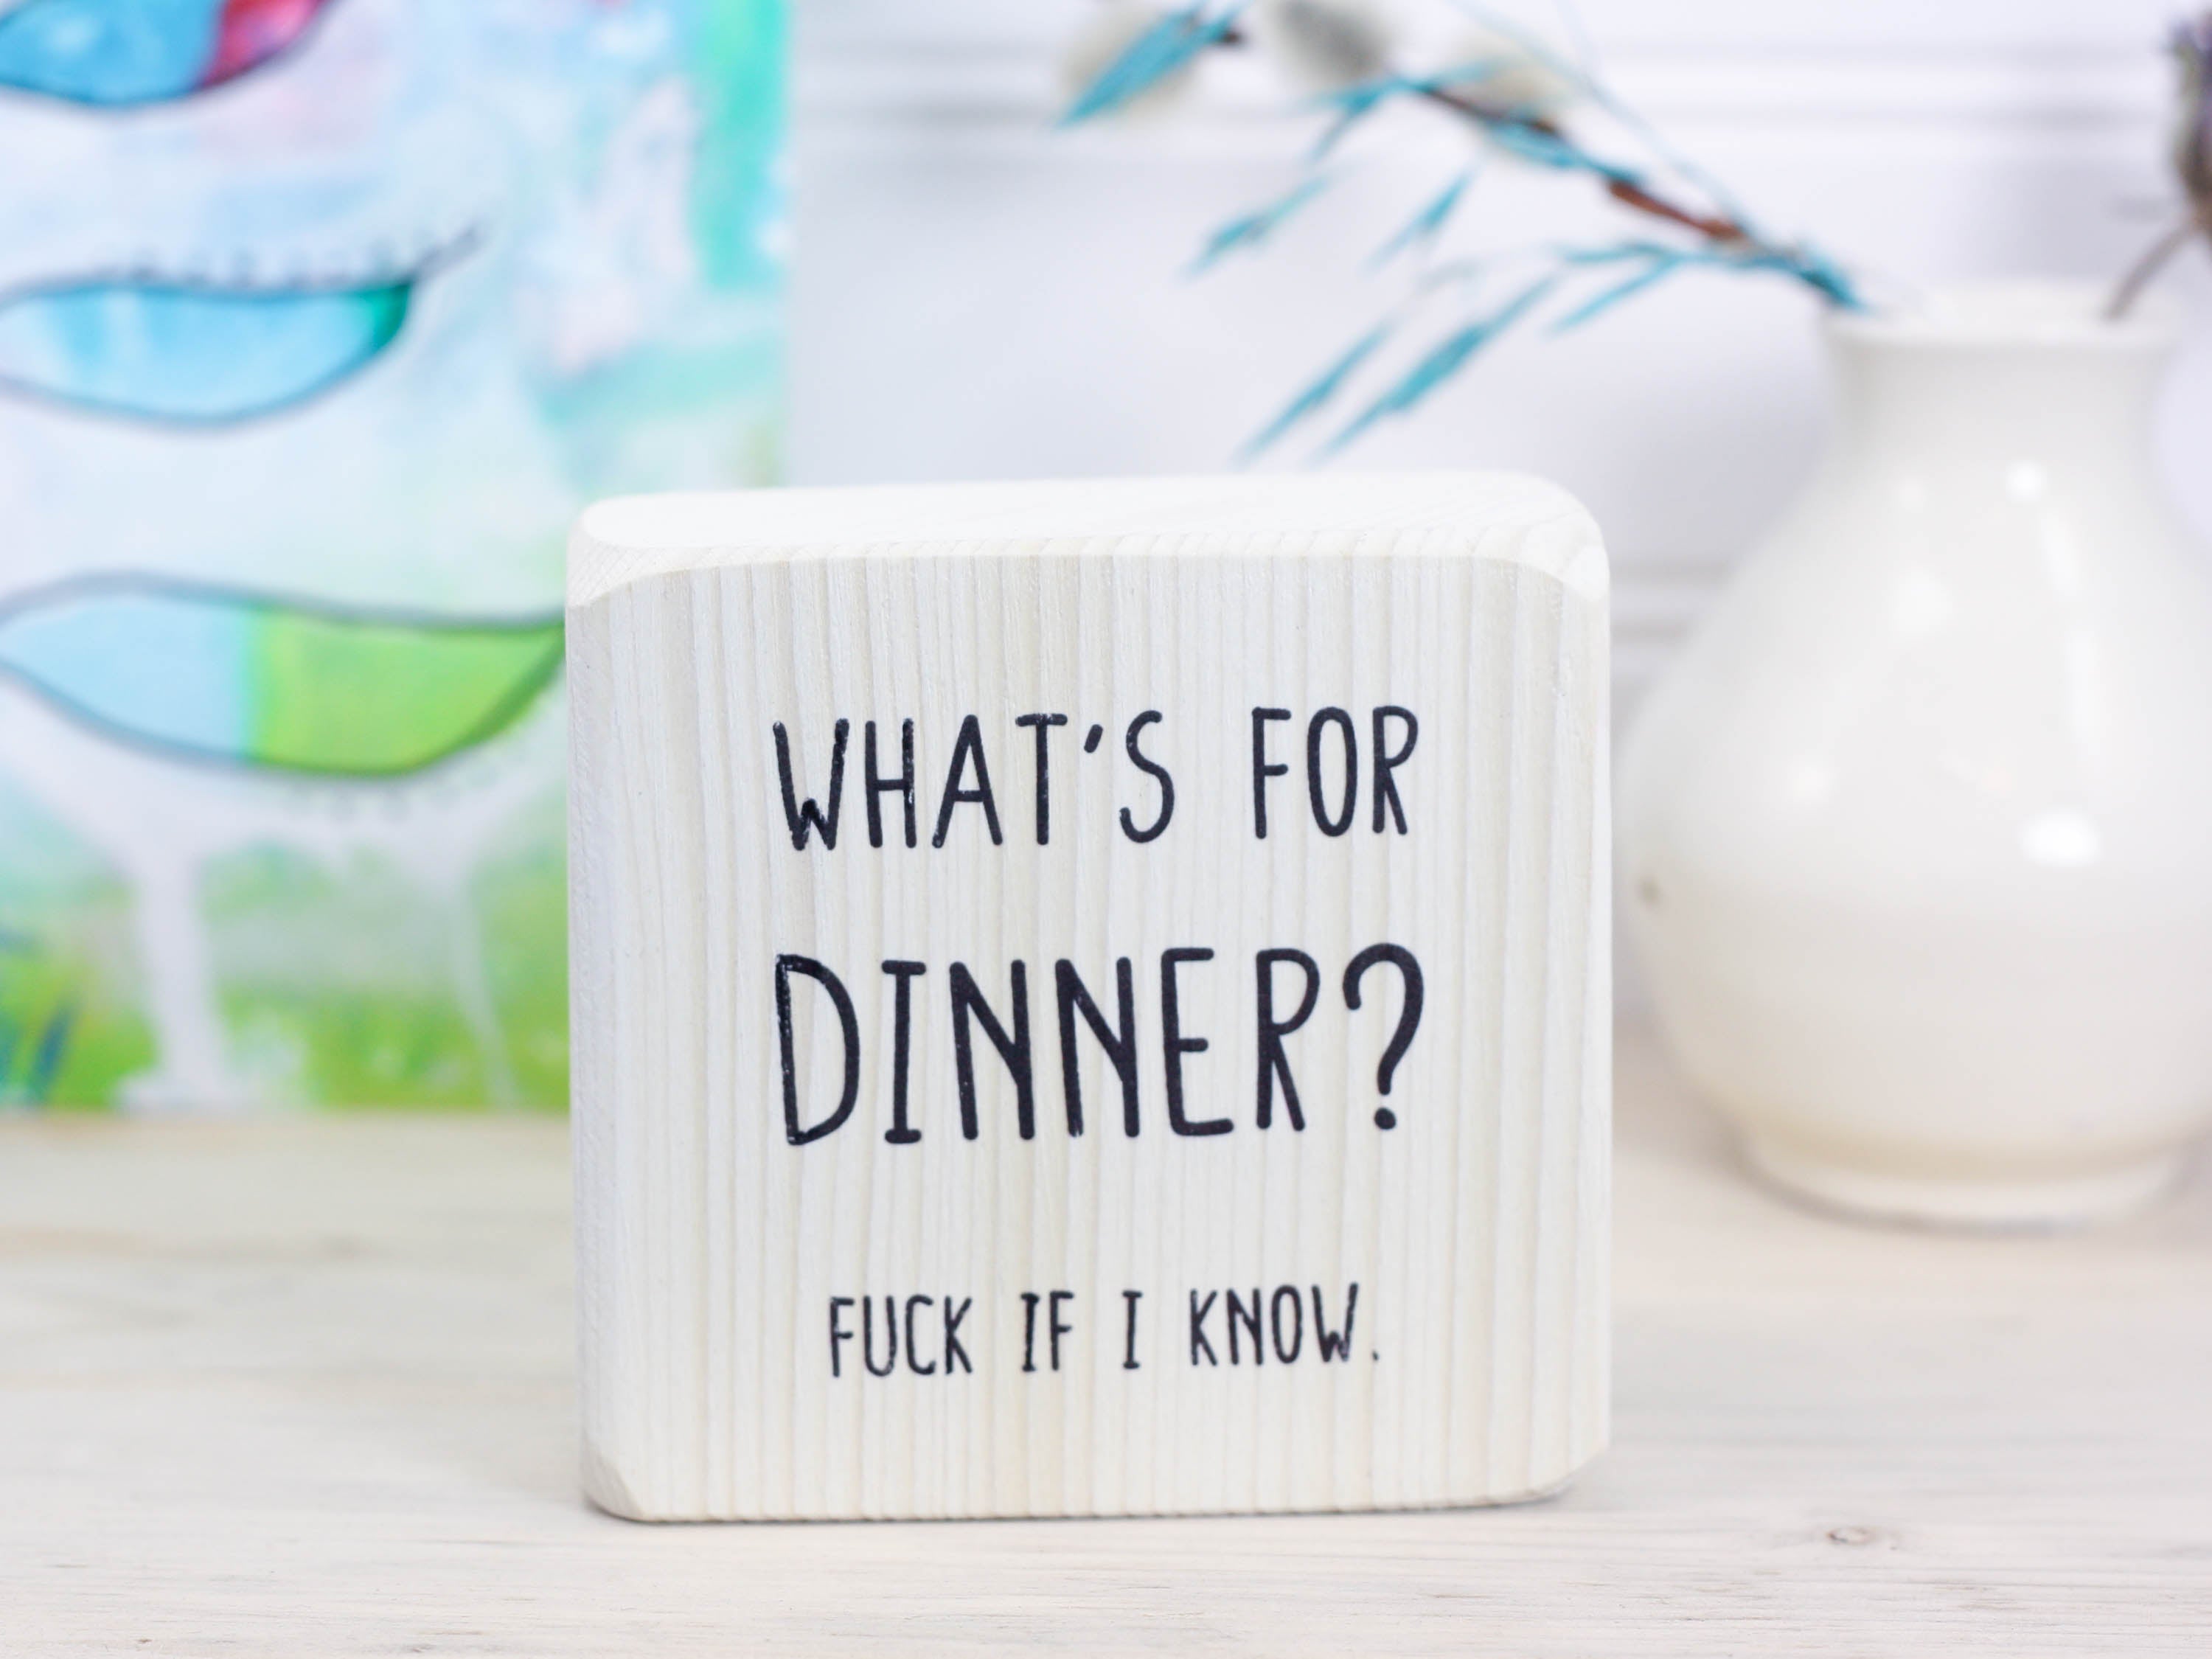 Small whitewash freestanding wood sign with the text "what's for dinner? Fuck if I know."